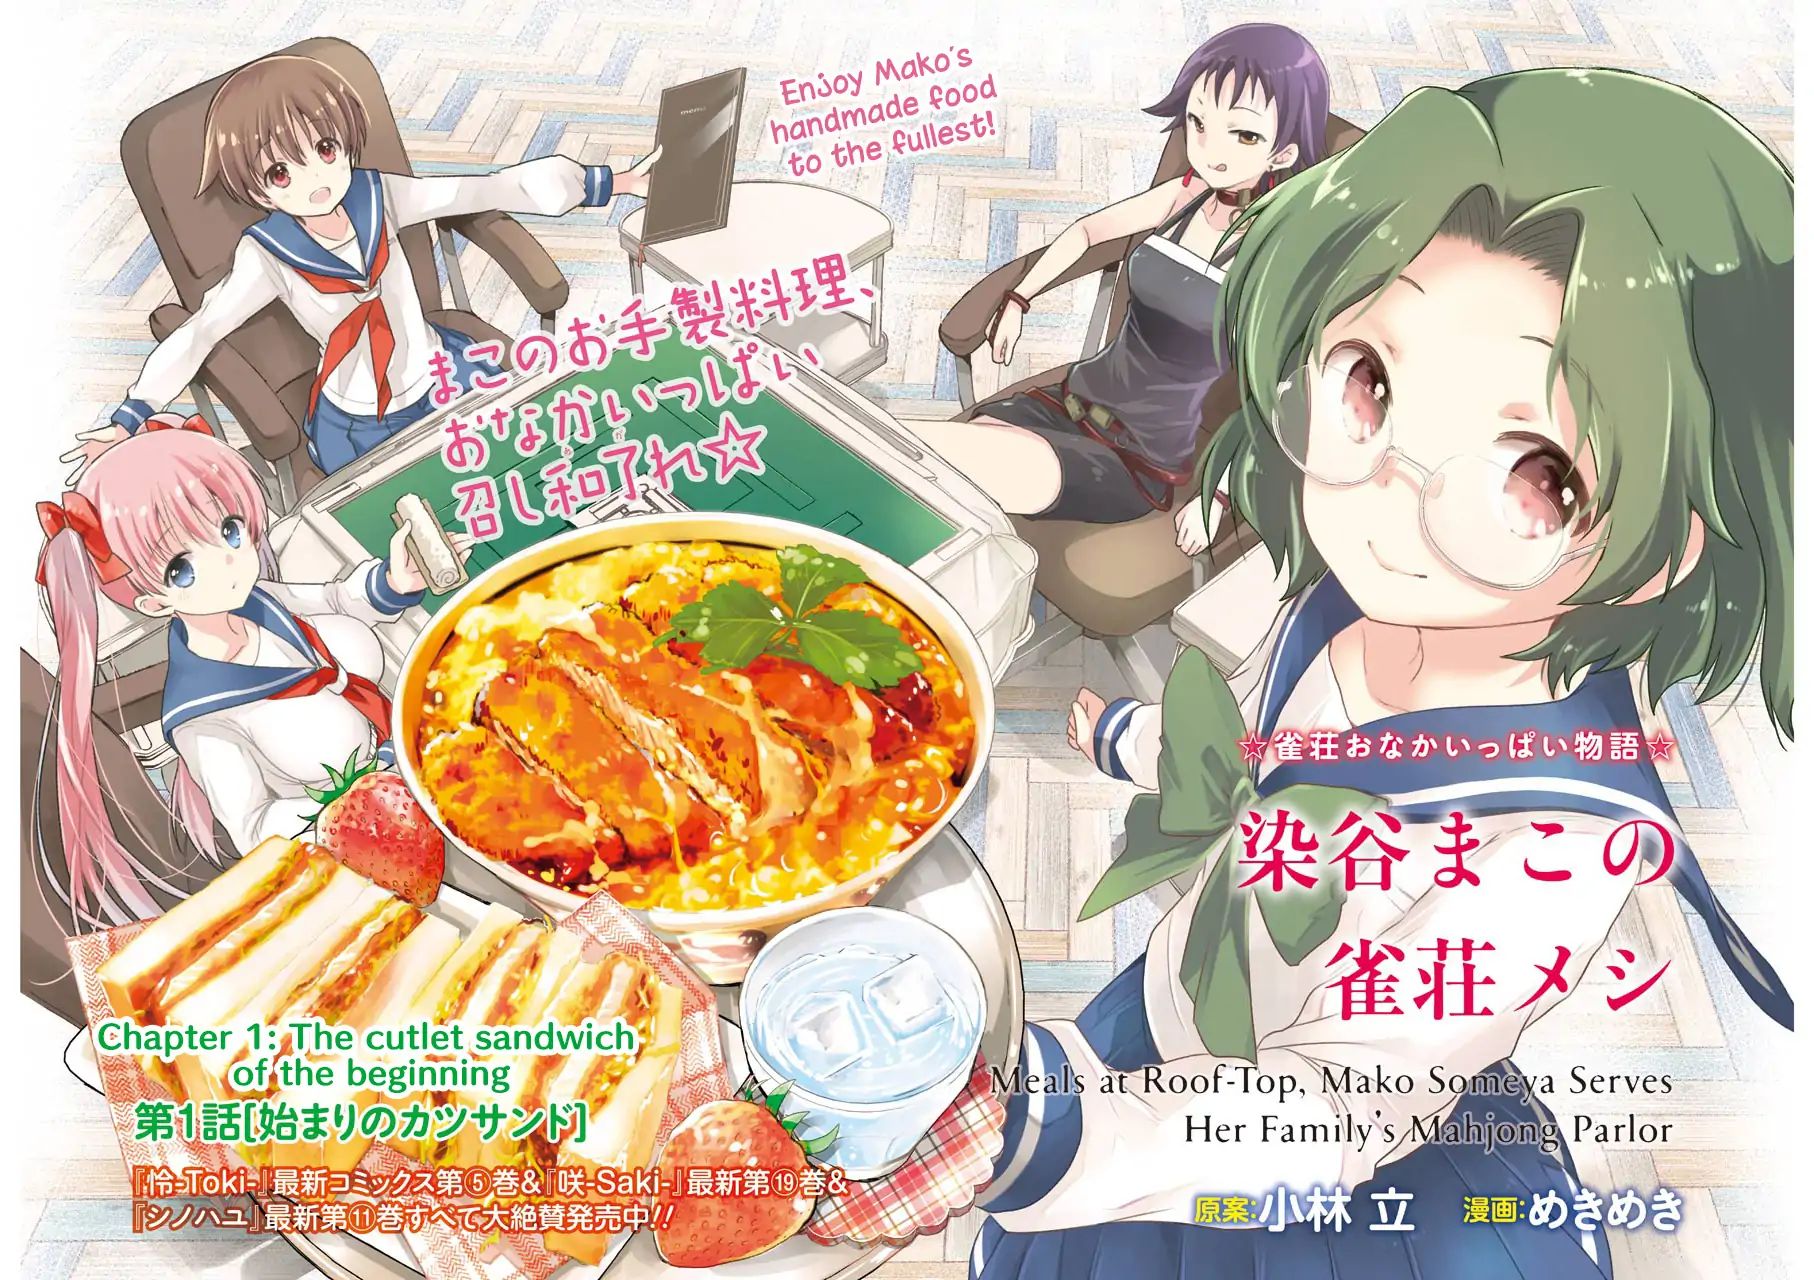 Someya Mako's Mahjong Parlor Food Chapter 1: The Cutlet Sandwich Of The Beginning - Picture 2